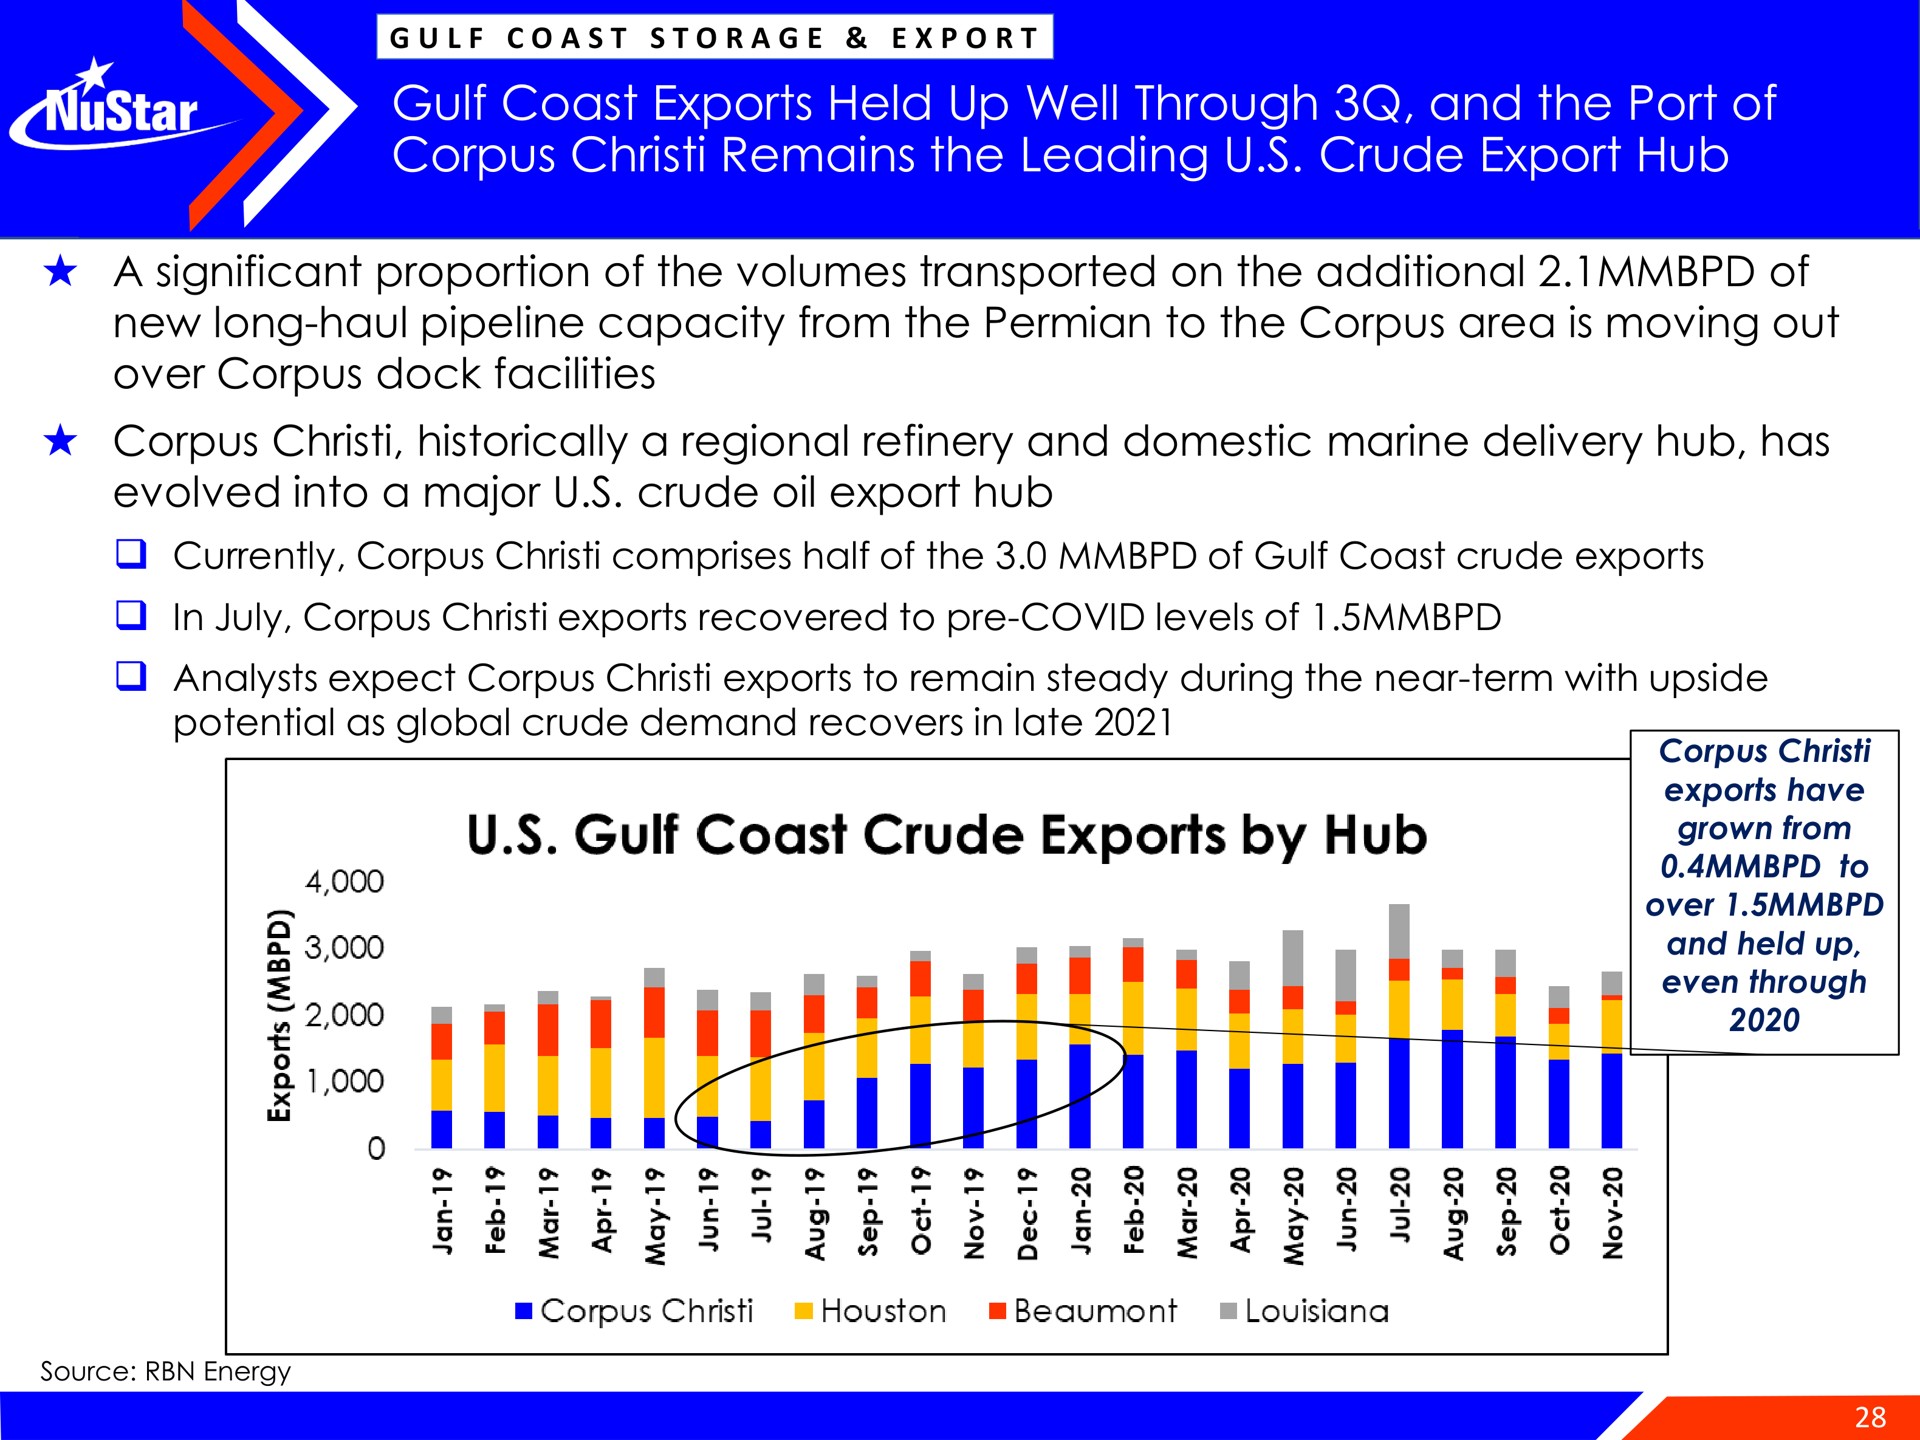 gulf coast exports held up well through and the port of corpus remains the leading crude export hub by | NuStar Energy